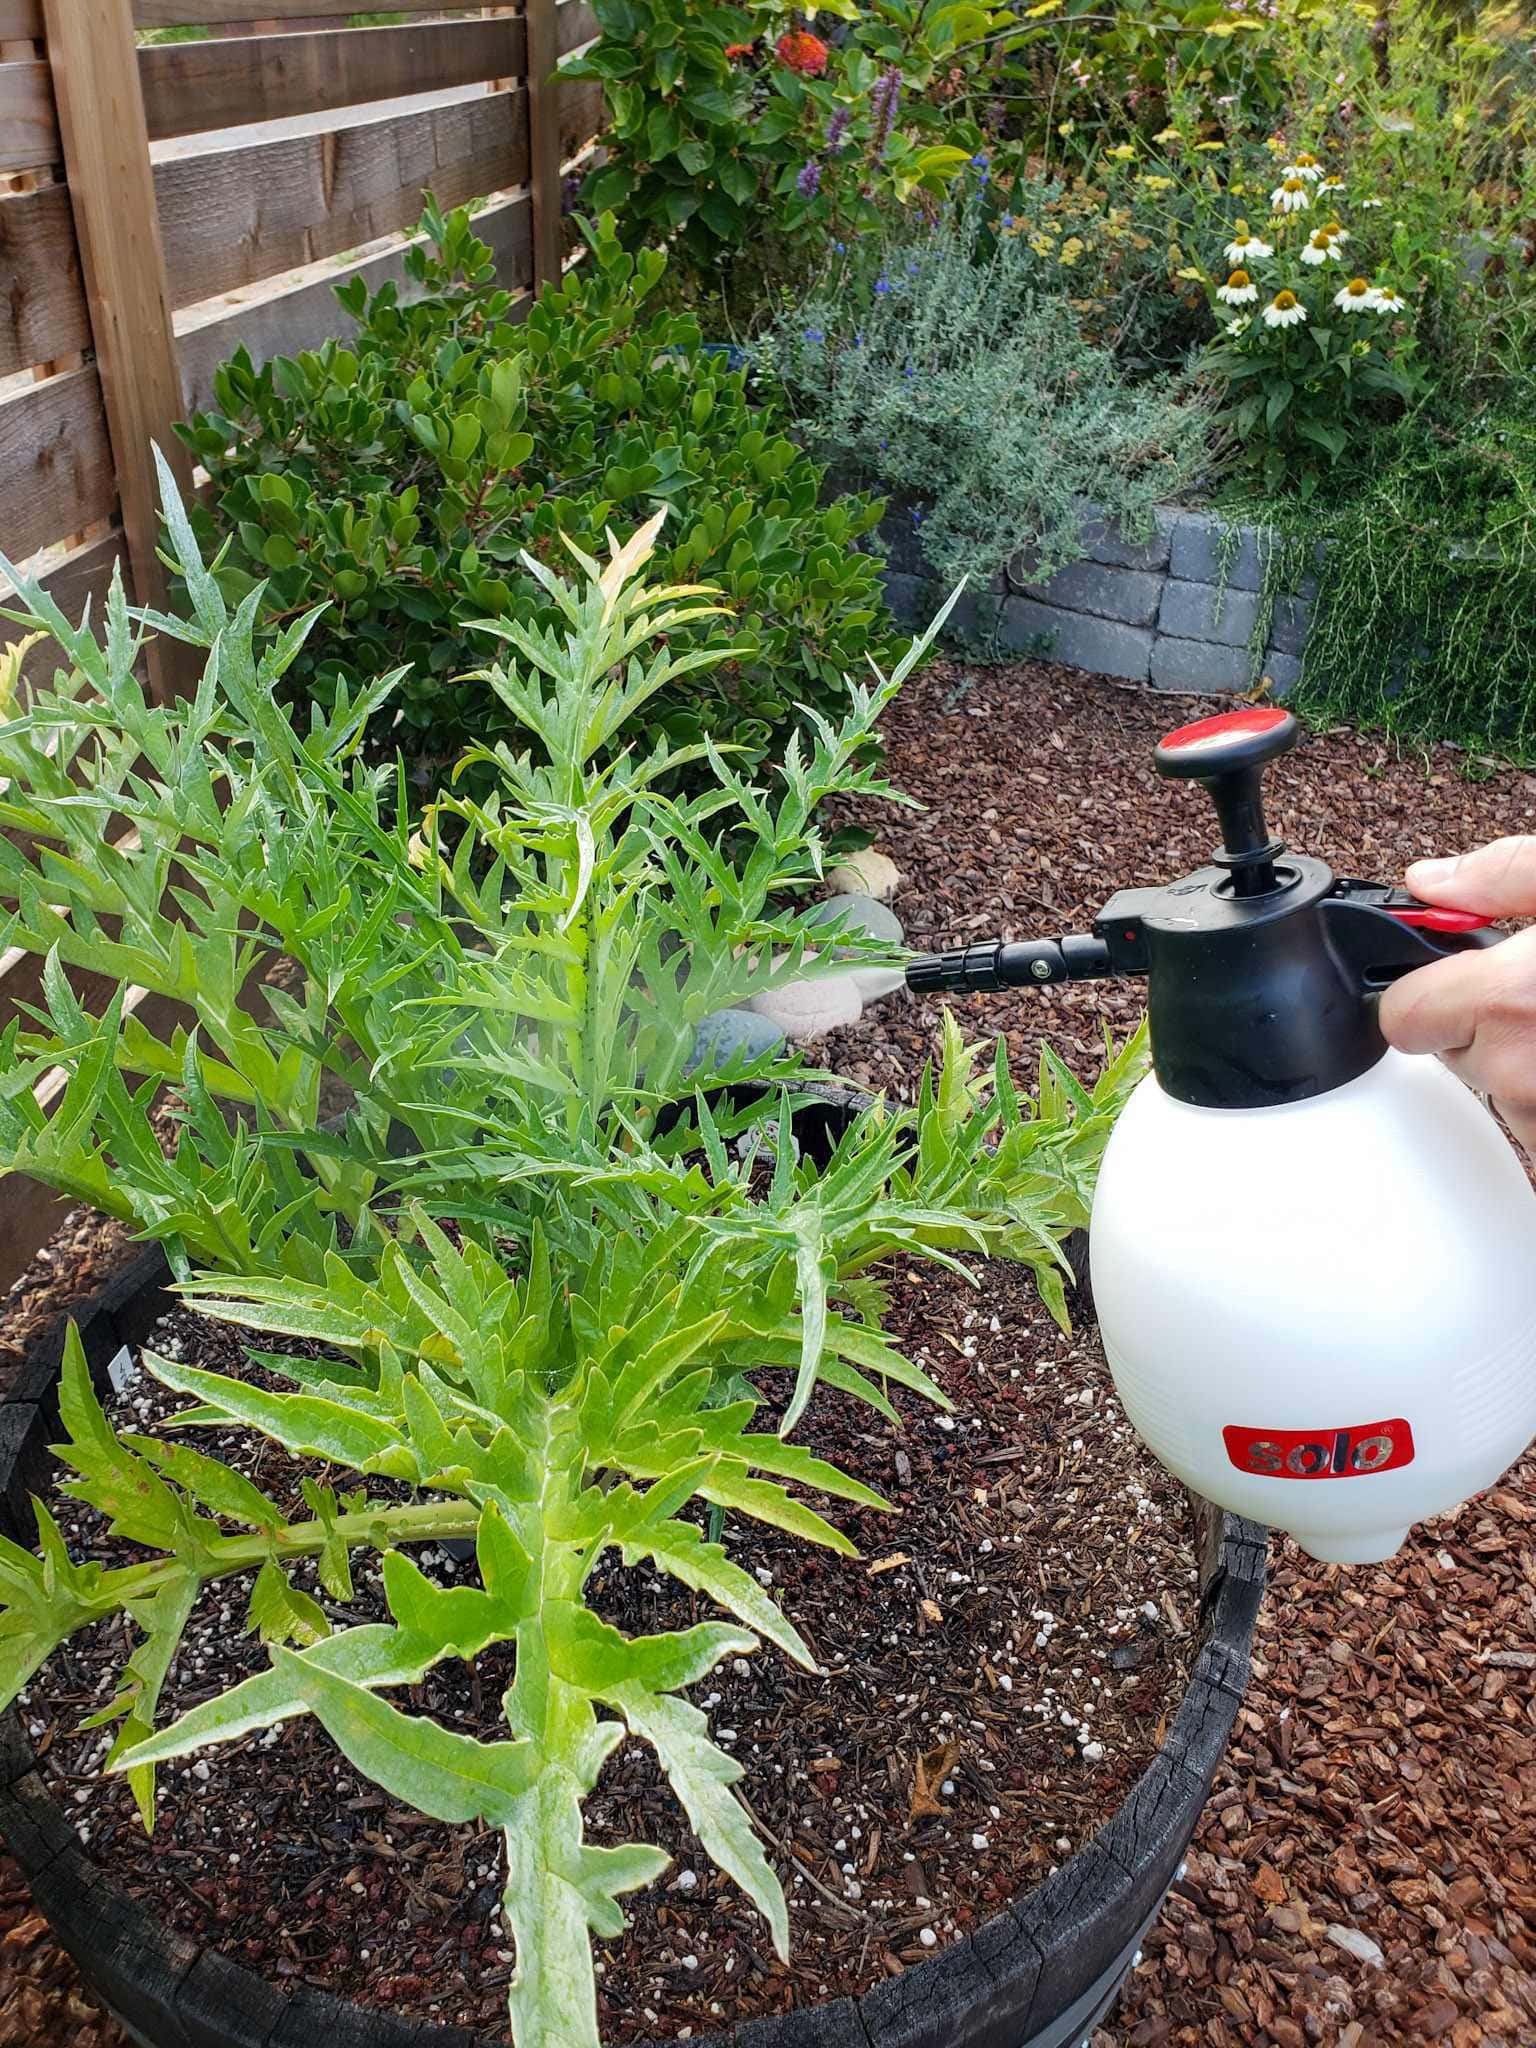 A hand is using a small handheld pump sprayer to spray an artichoke plant that is infected with aphids. The artichoke is planted in a half wine barrel amongst bark mulch ground cover, various shrubs, flowering annuals, and perennials. 